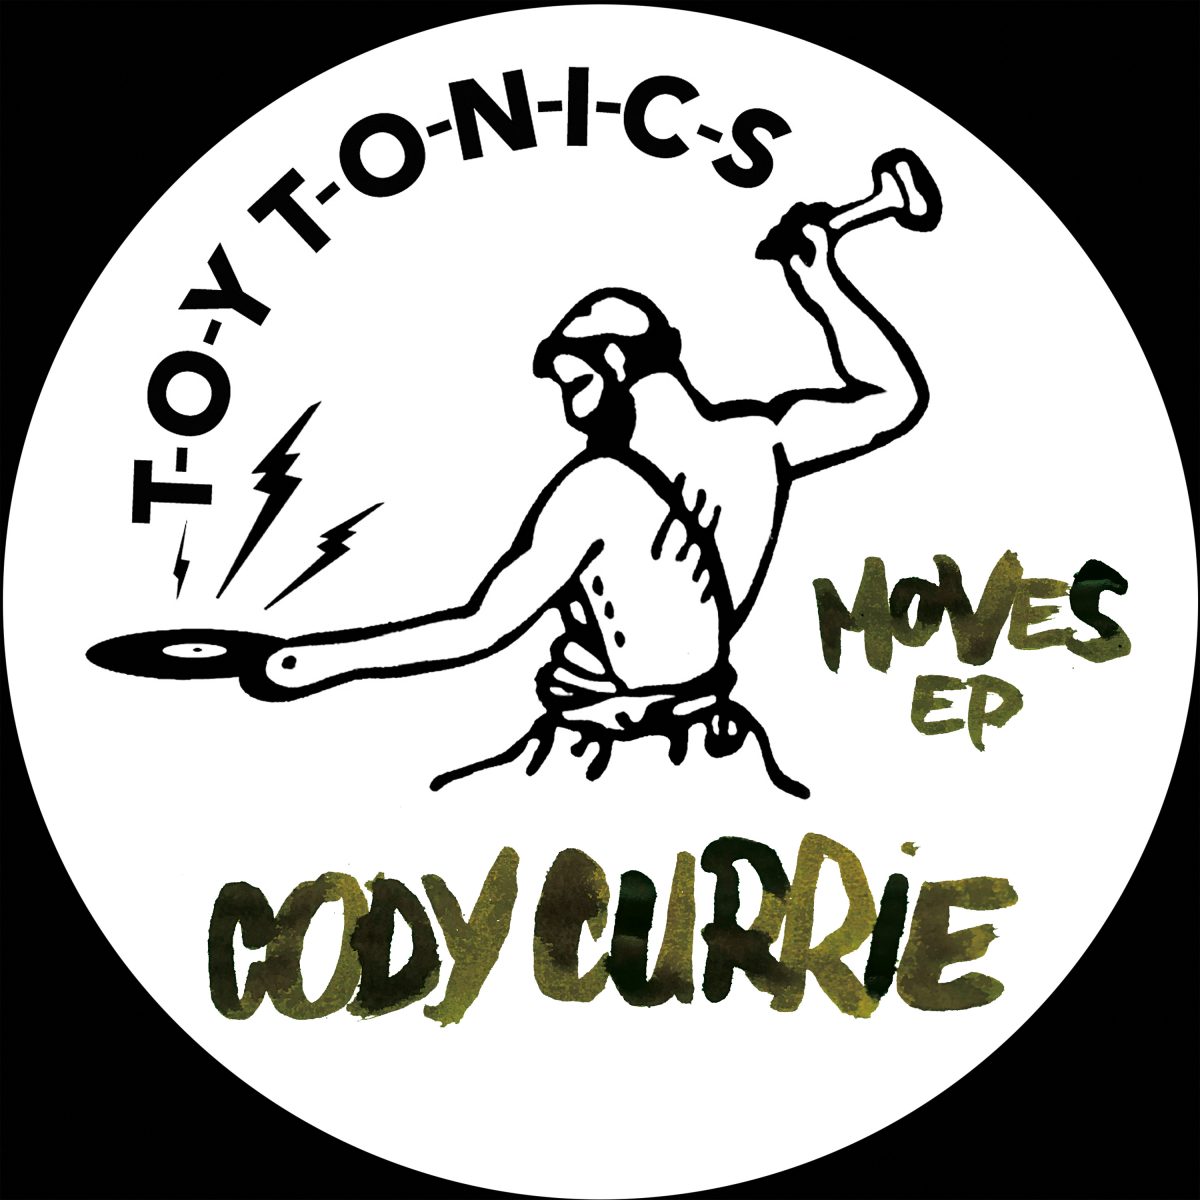 Cody Currie – Moves EP [TOYT113]